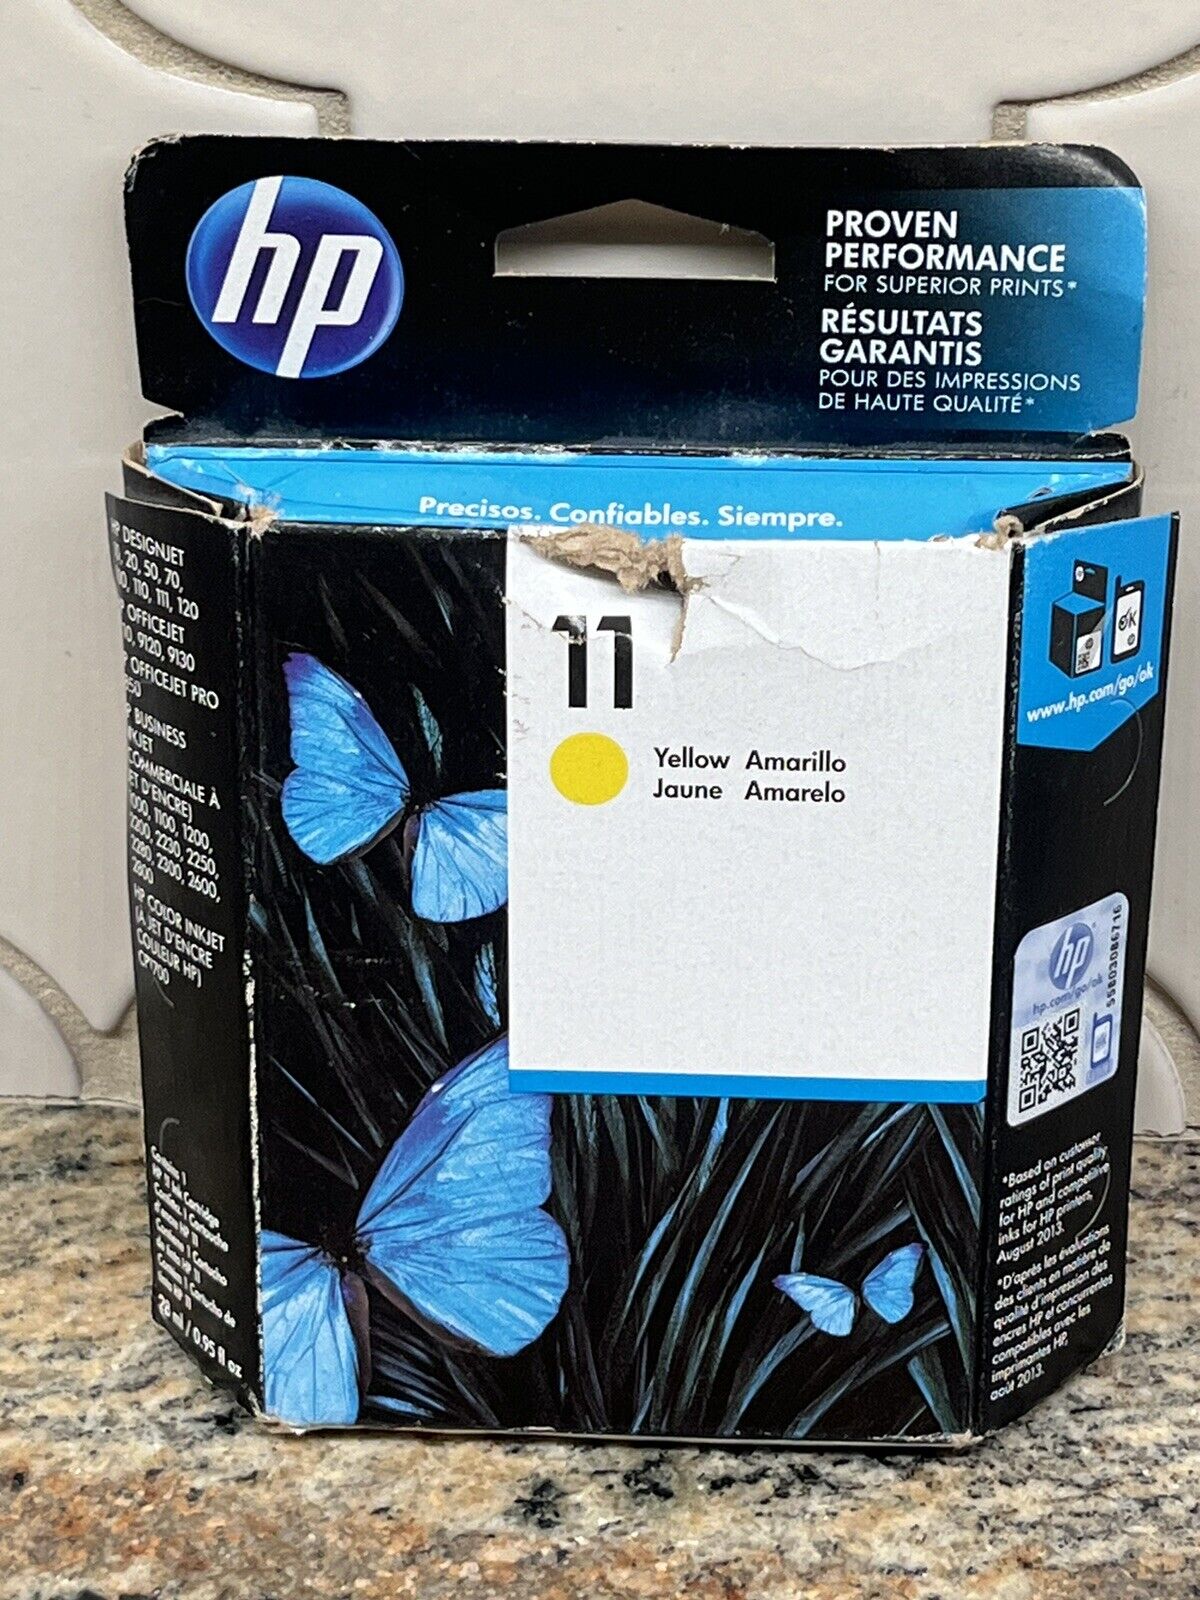 NEW HP 11 INK CARTRIDGE YELLOW  C4838A